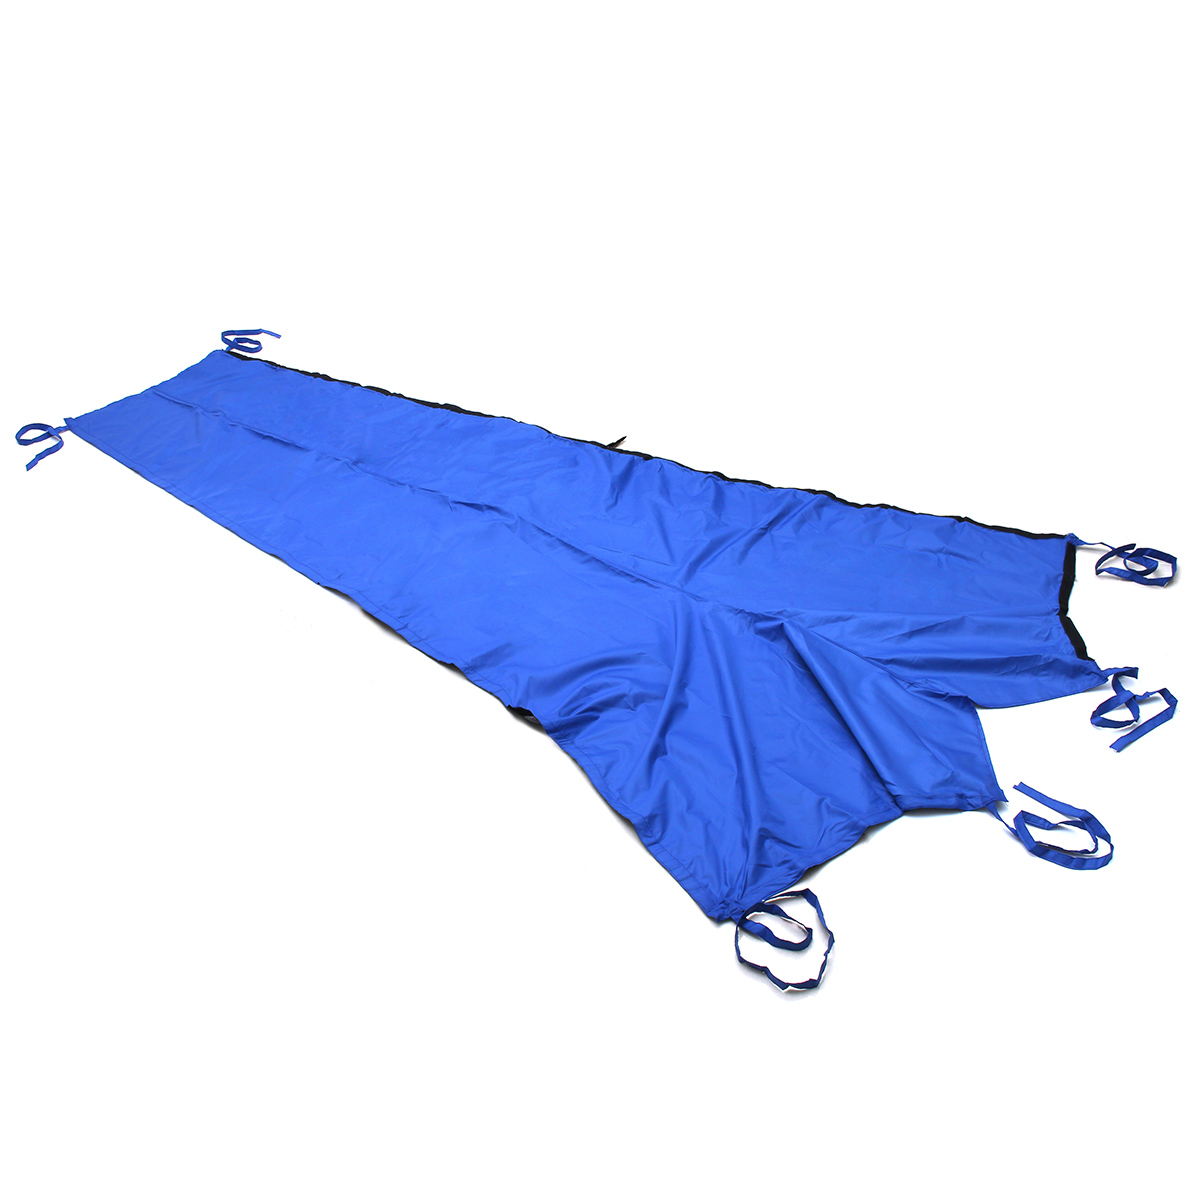 420D 8-9Ft Sailboat Cover Blue Sail Cover Mainsail Boom Waterproof Protection